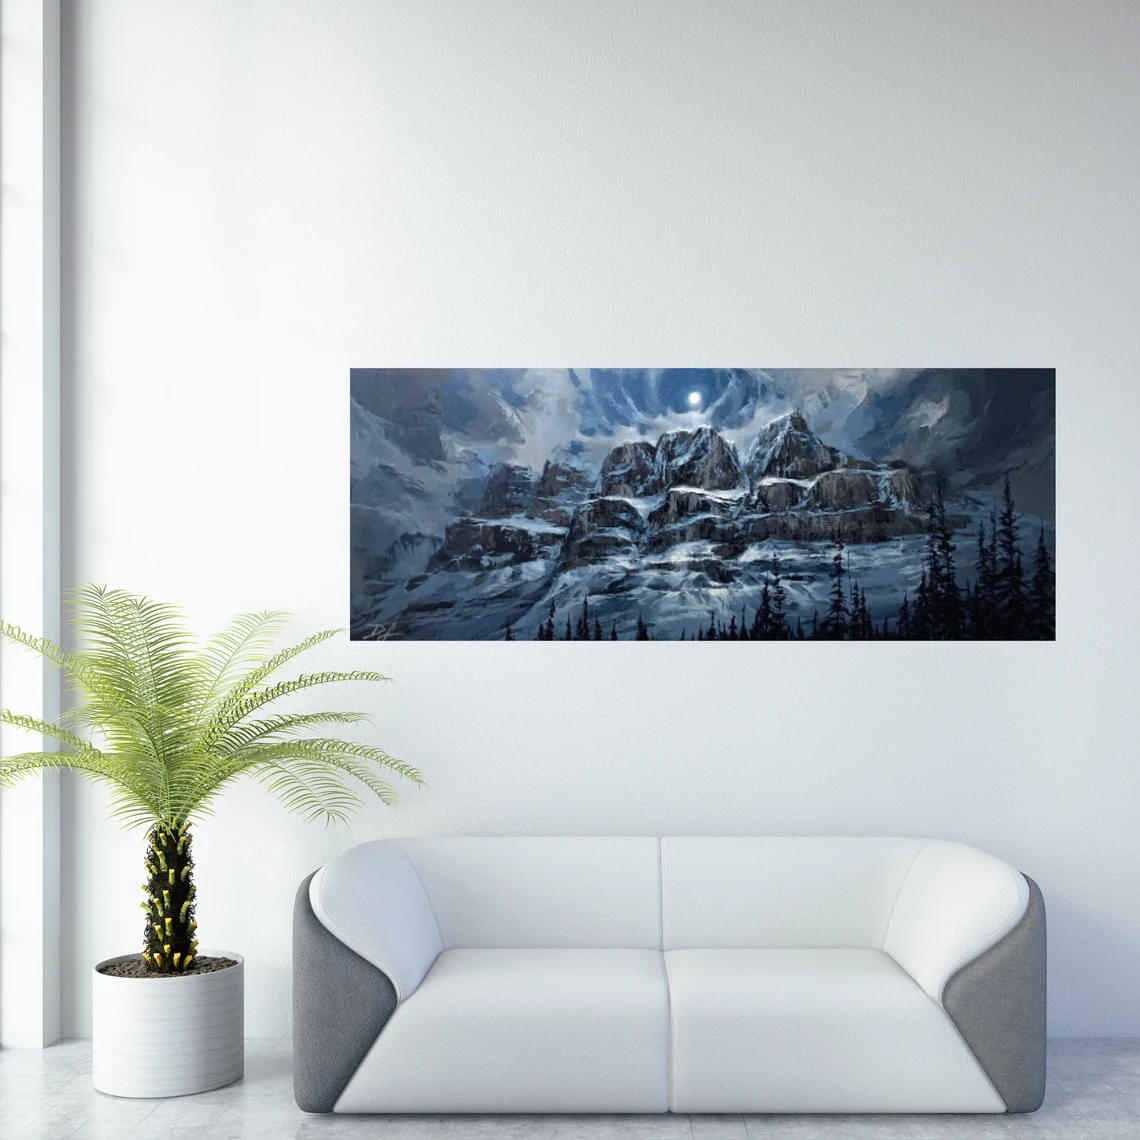 "The Moon Castle" - Landscapes Artwork Sample on Wall